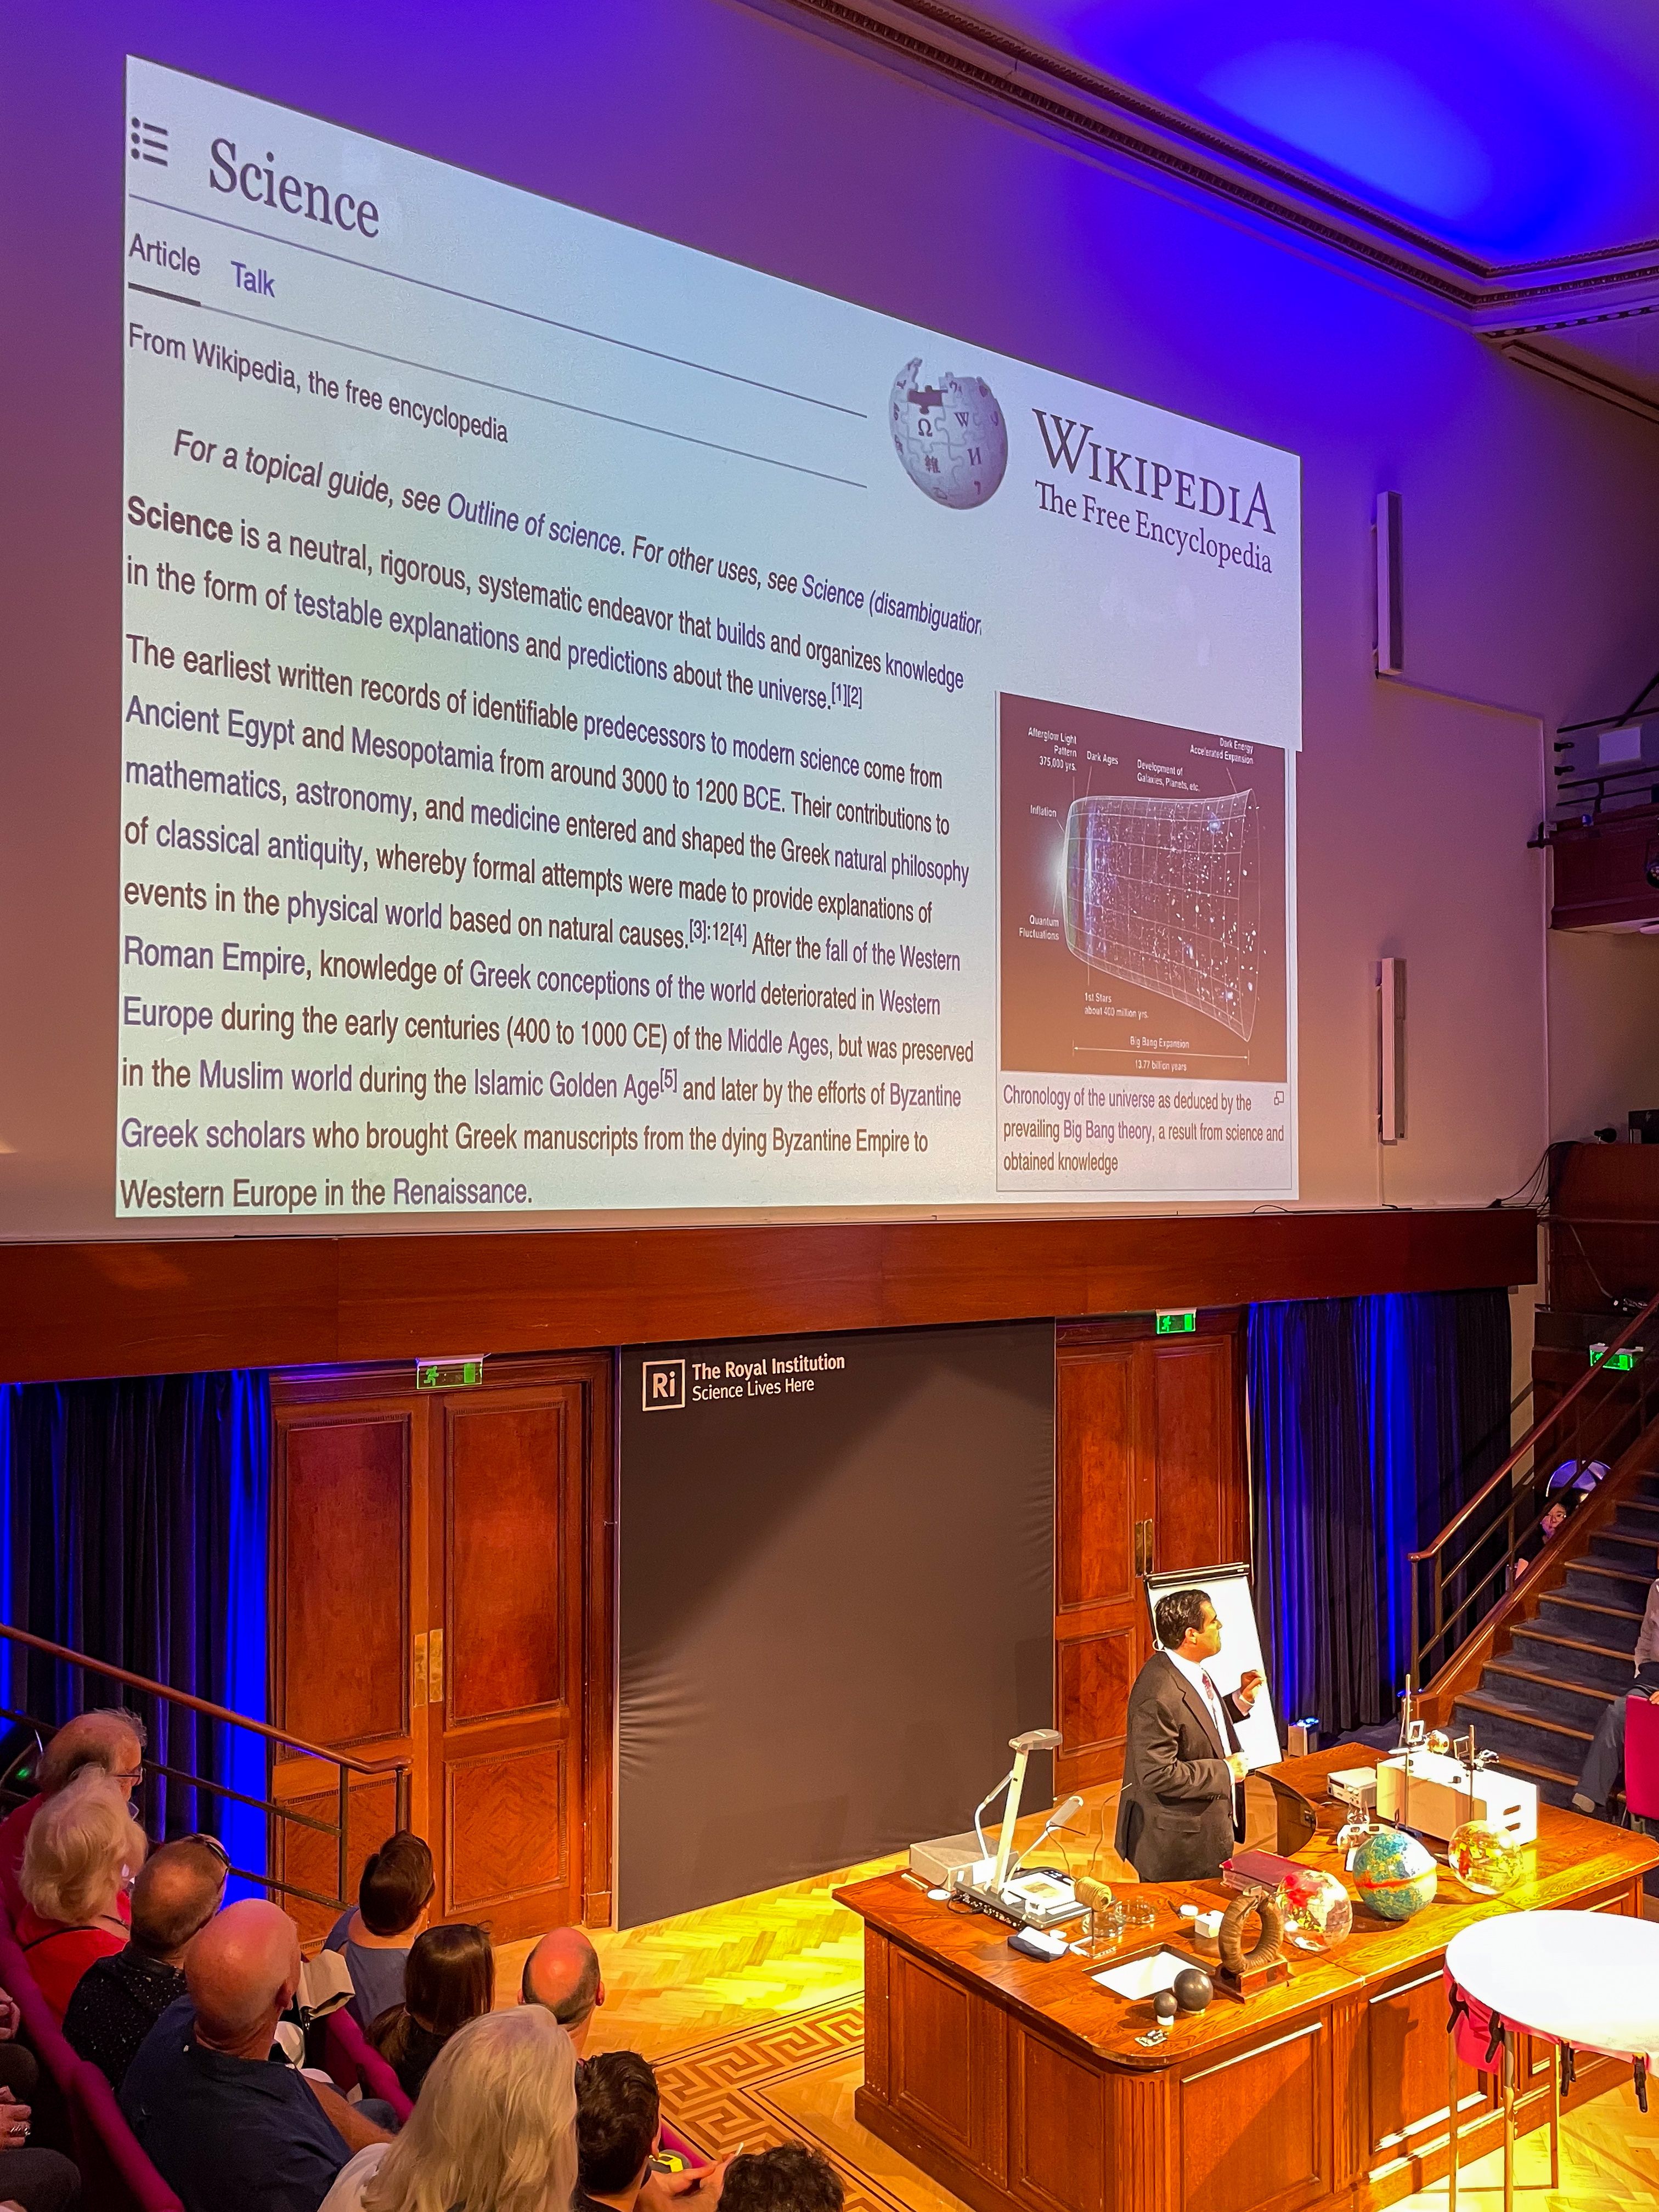 Upcoming science talks - Royal Institution